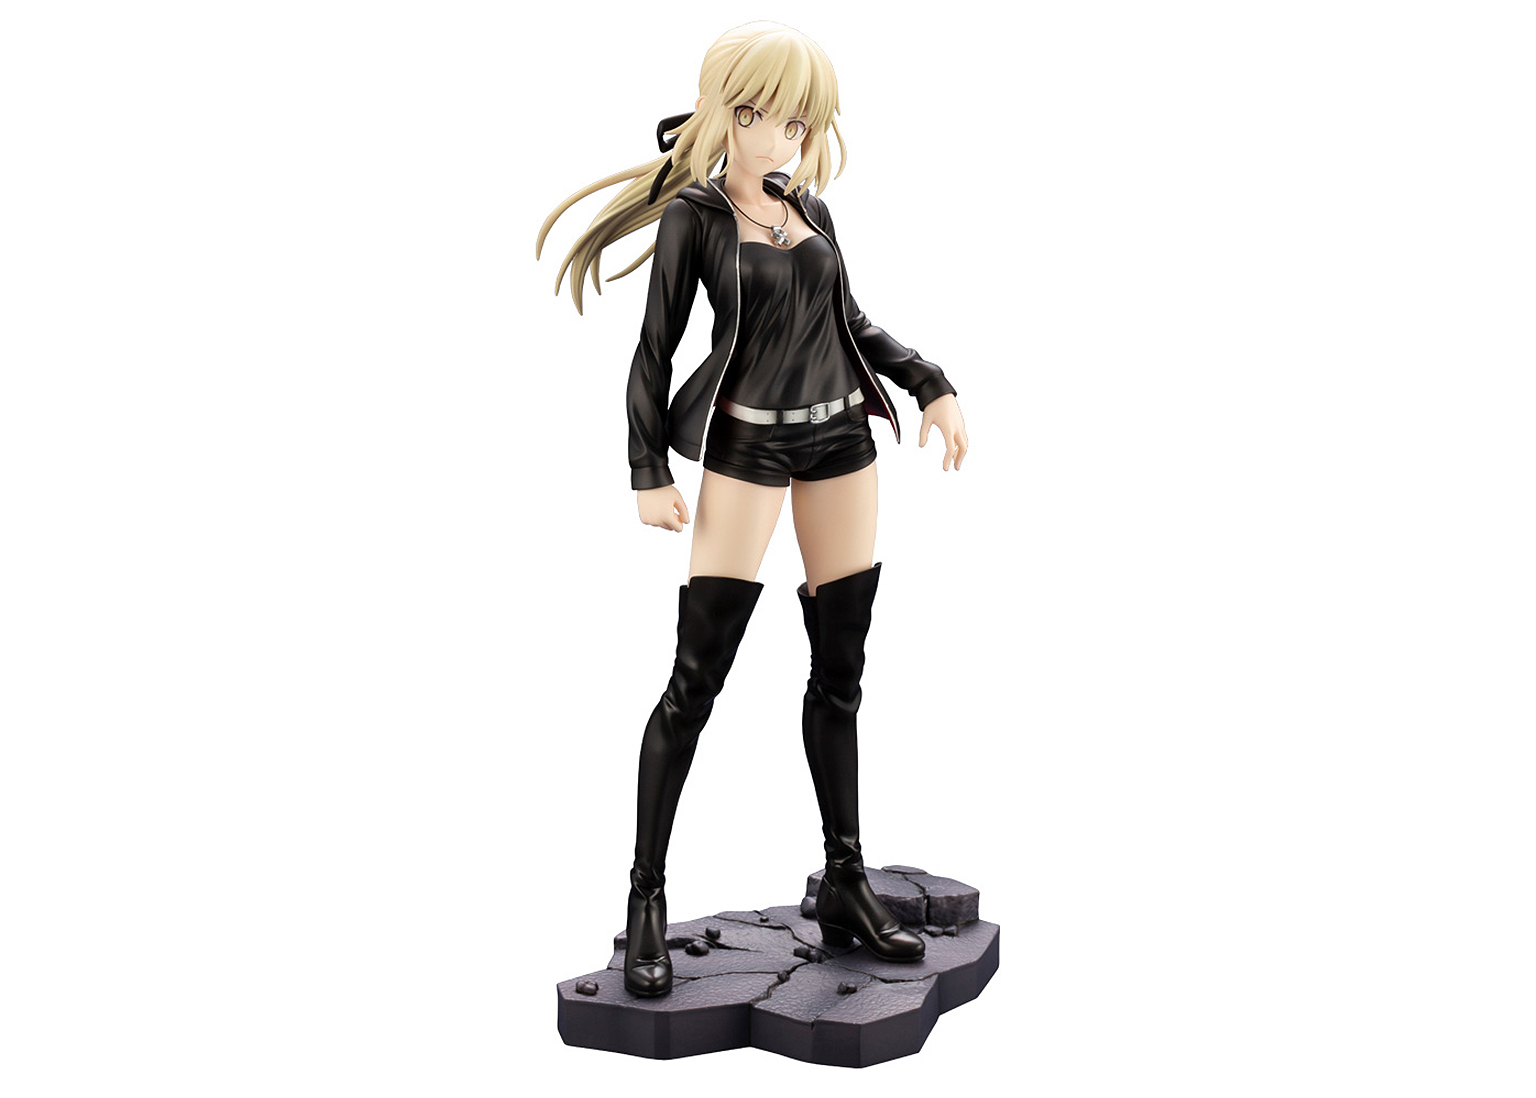 Fate Action Figures, Statues & Nendoroid - Hobby Figures UK